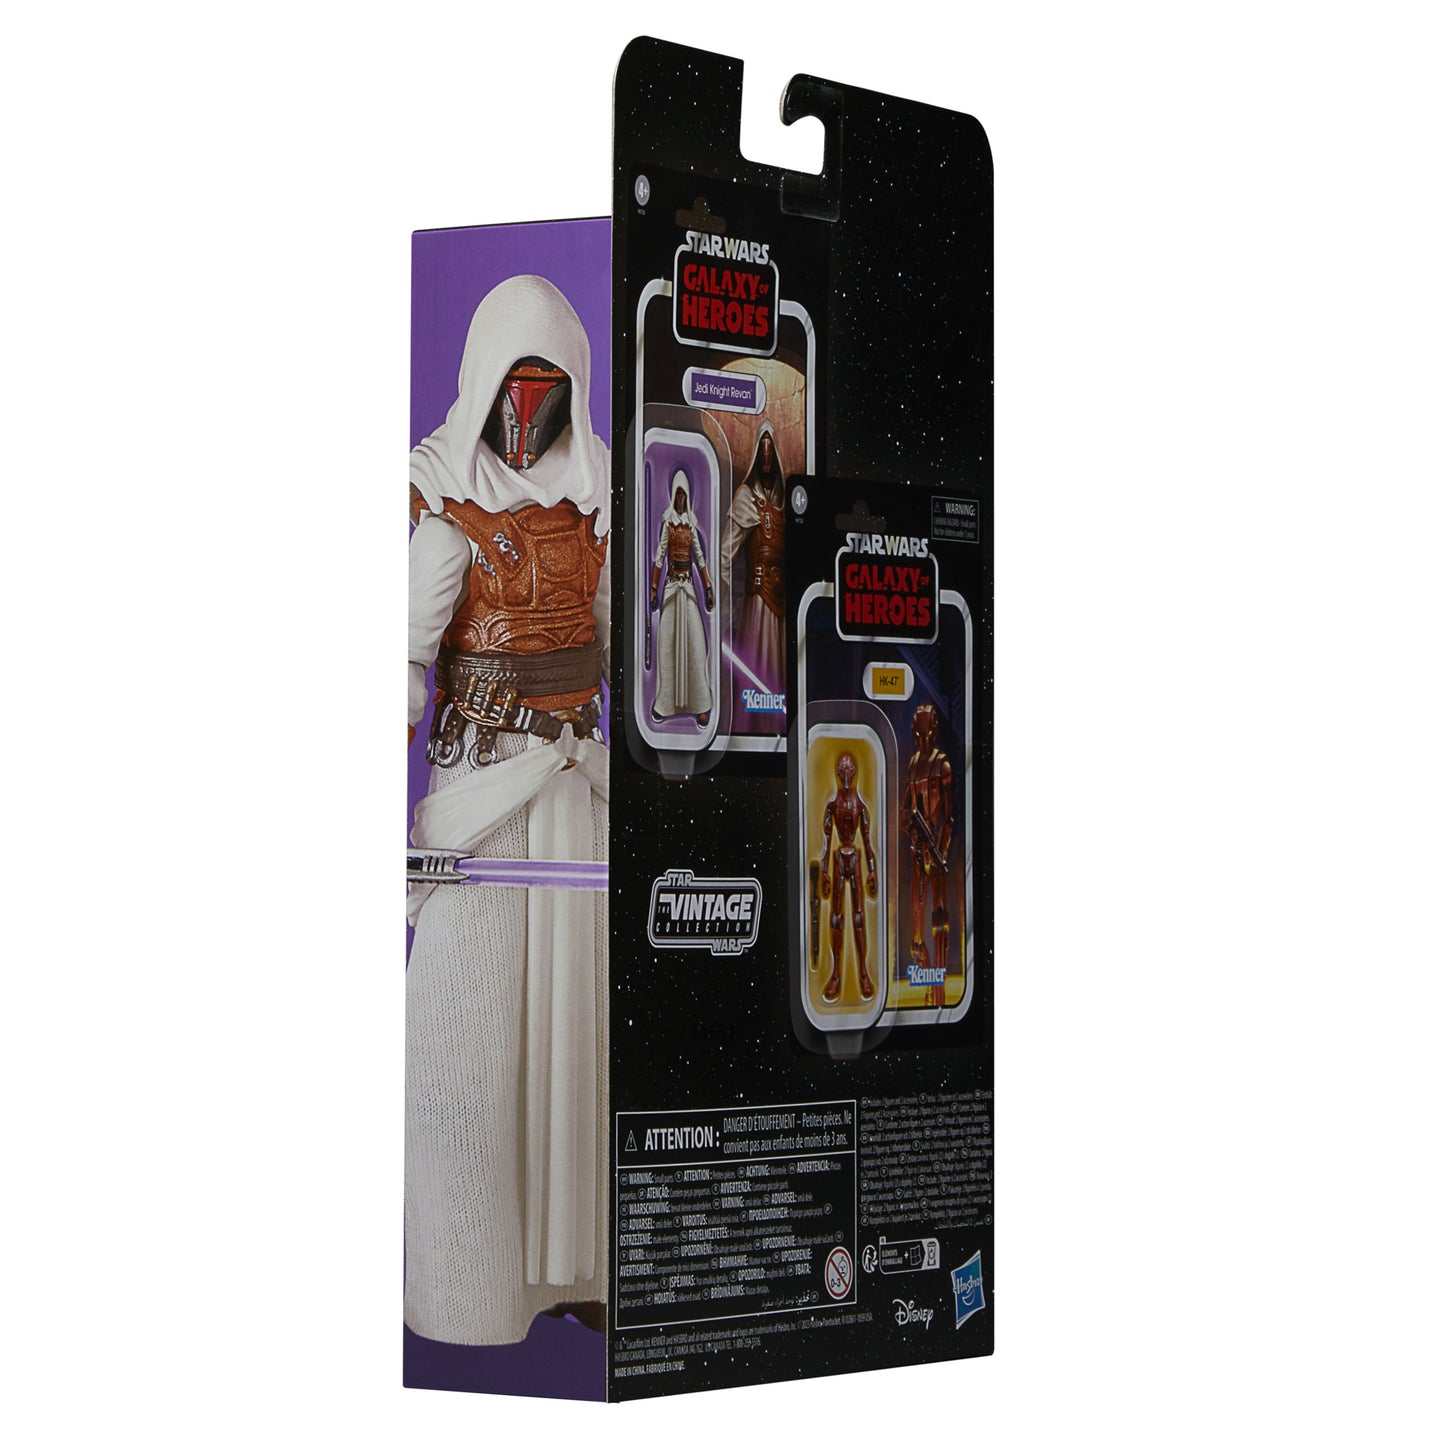 Star Wars The Vintage Collection HK-47 & Jedi Knight Revan Action Figures (3.75”) HERETOSERVEYOU